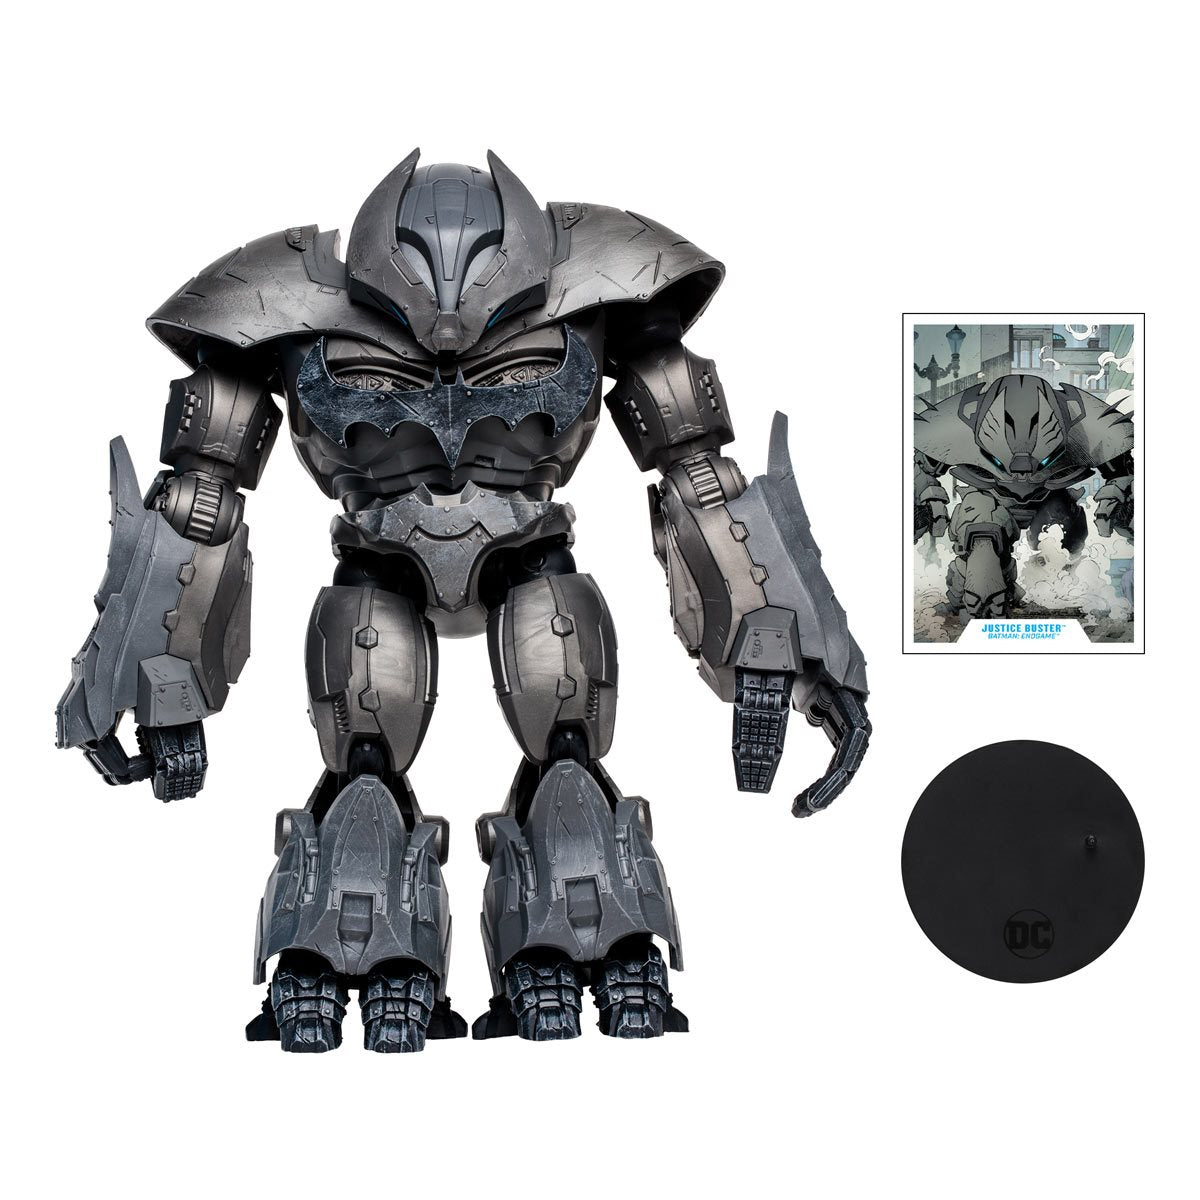 DC Collector Megafig Wave 6 Batman: Endgame Justice Buster Batsuit Action Figure with accessories- Heretoserveyou